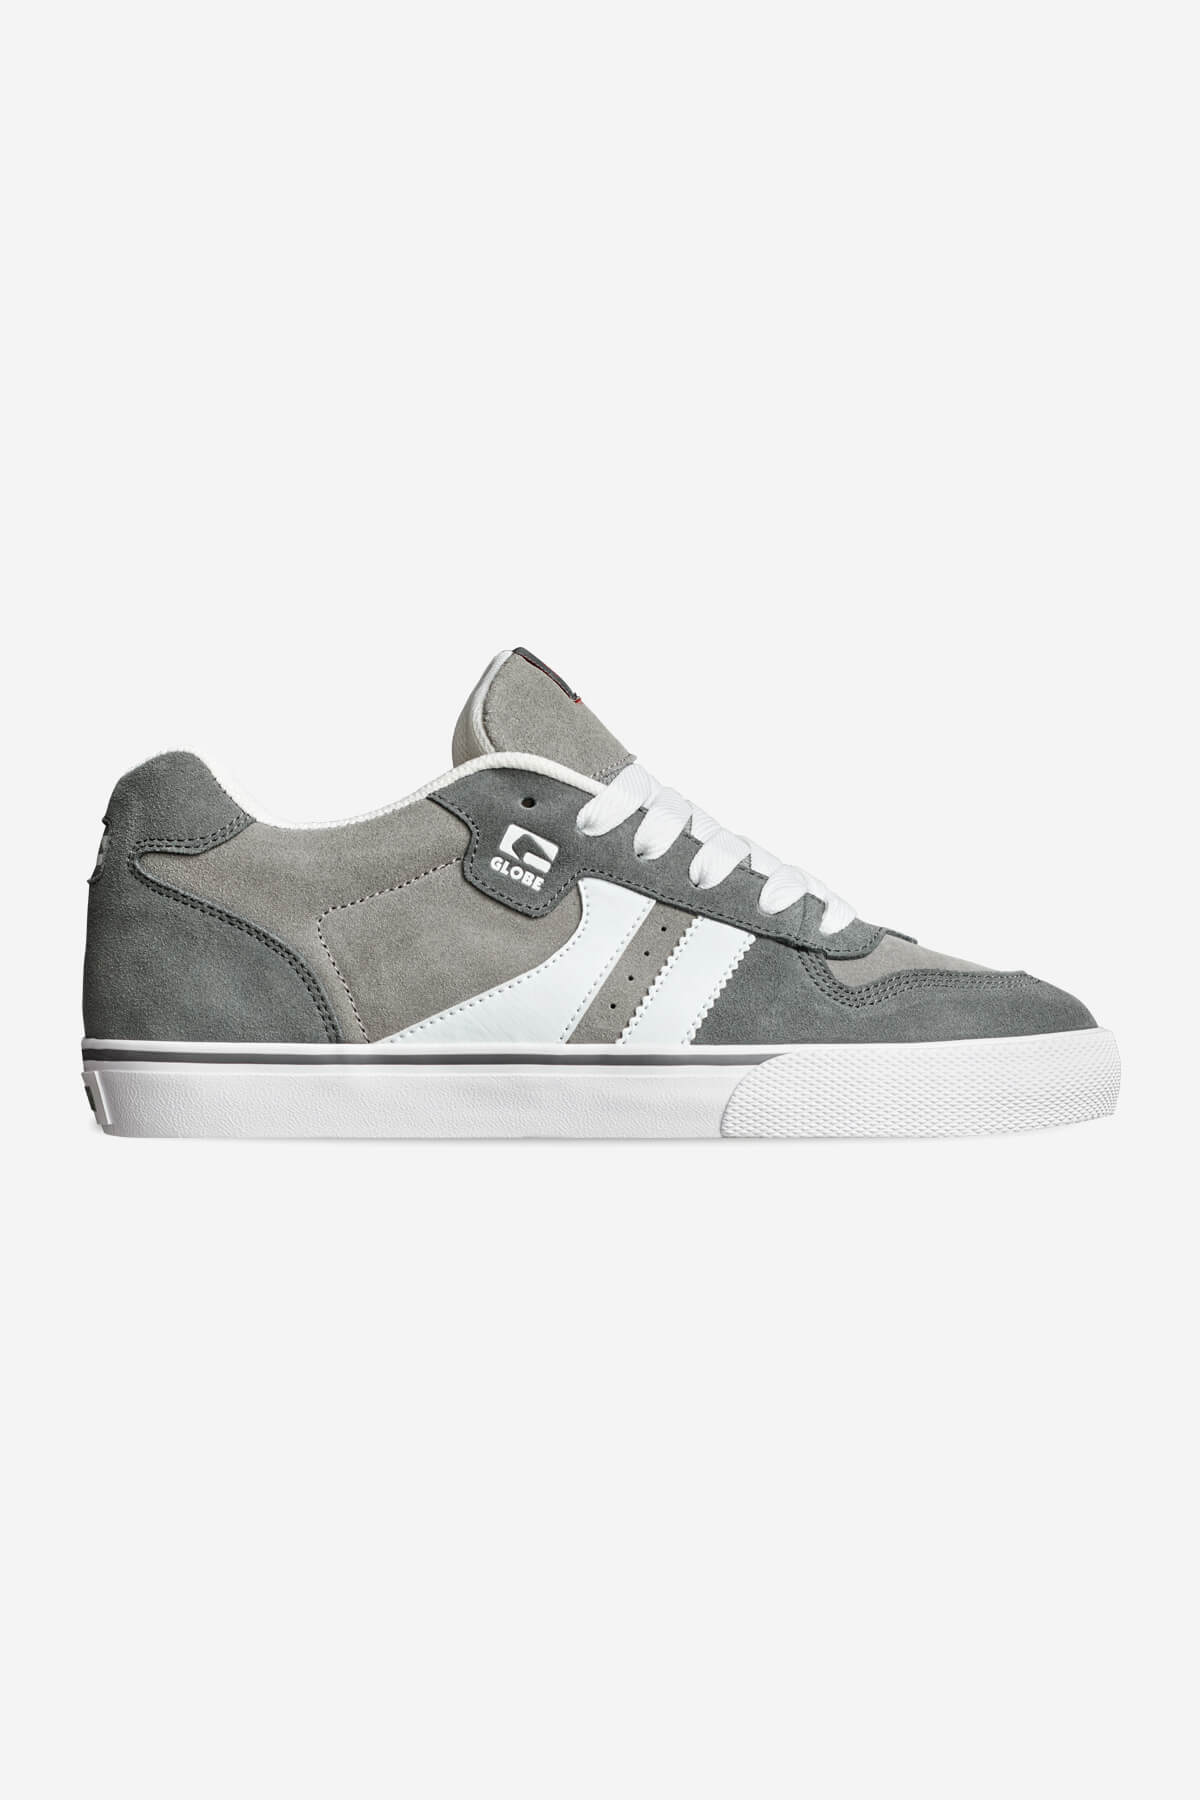 encore-2 charcoal white  skateboard  chaussures